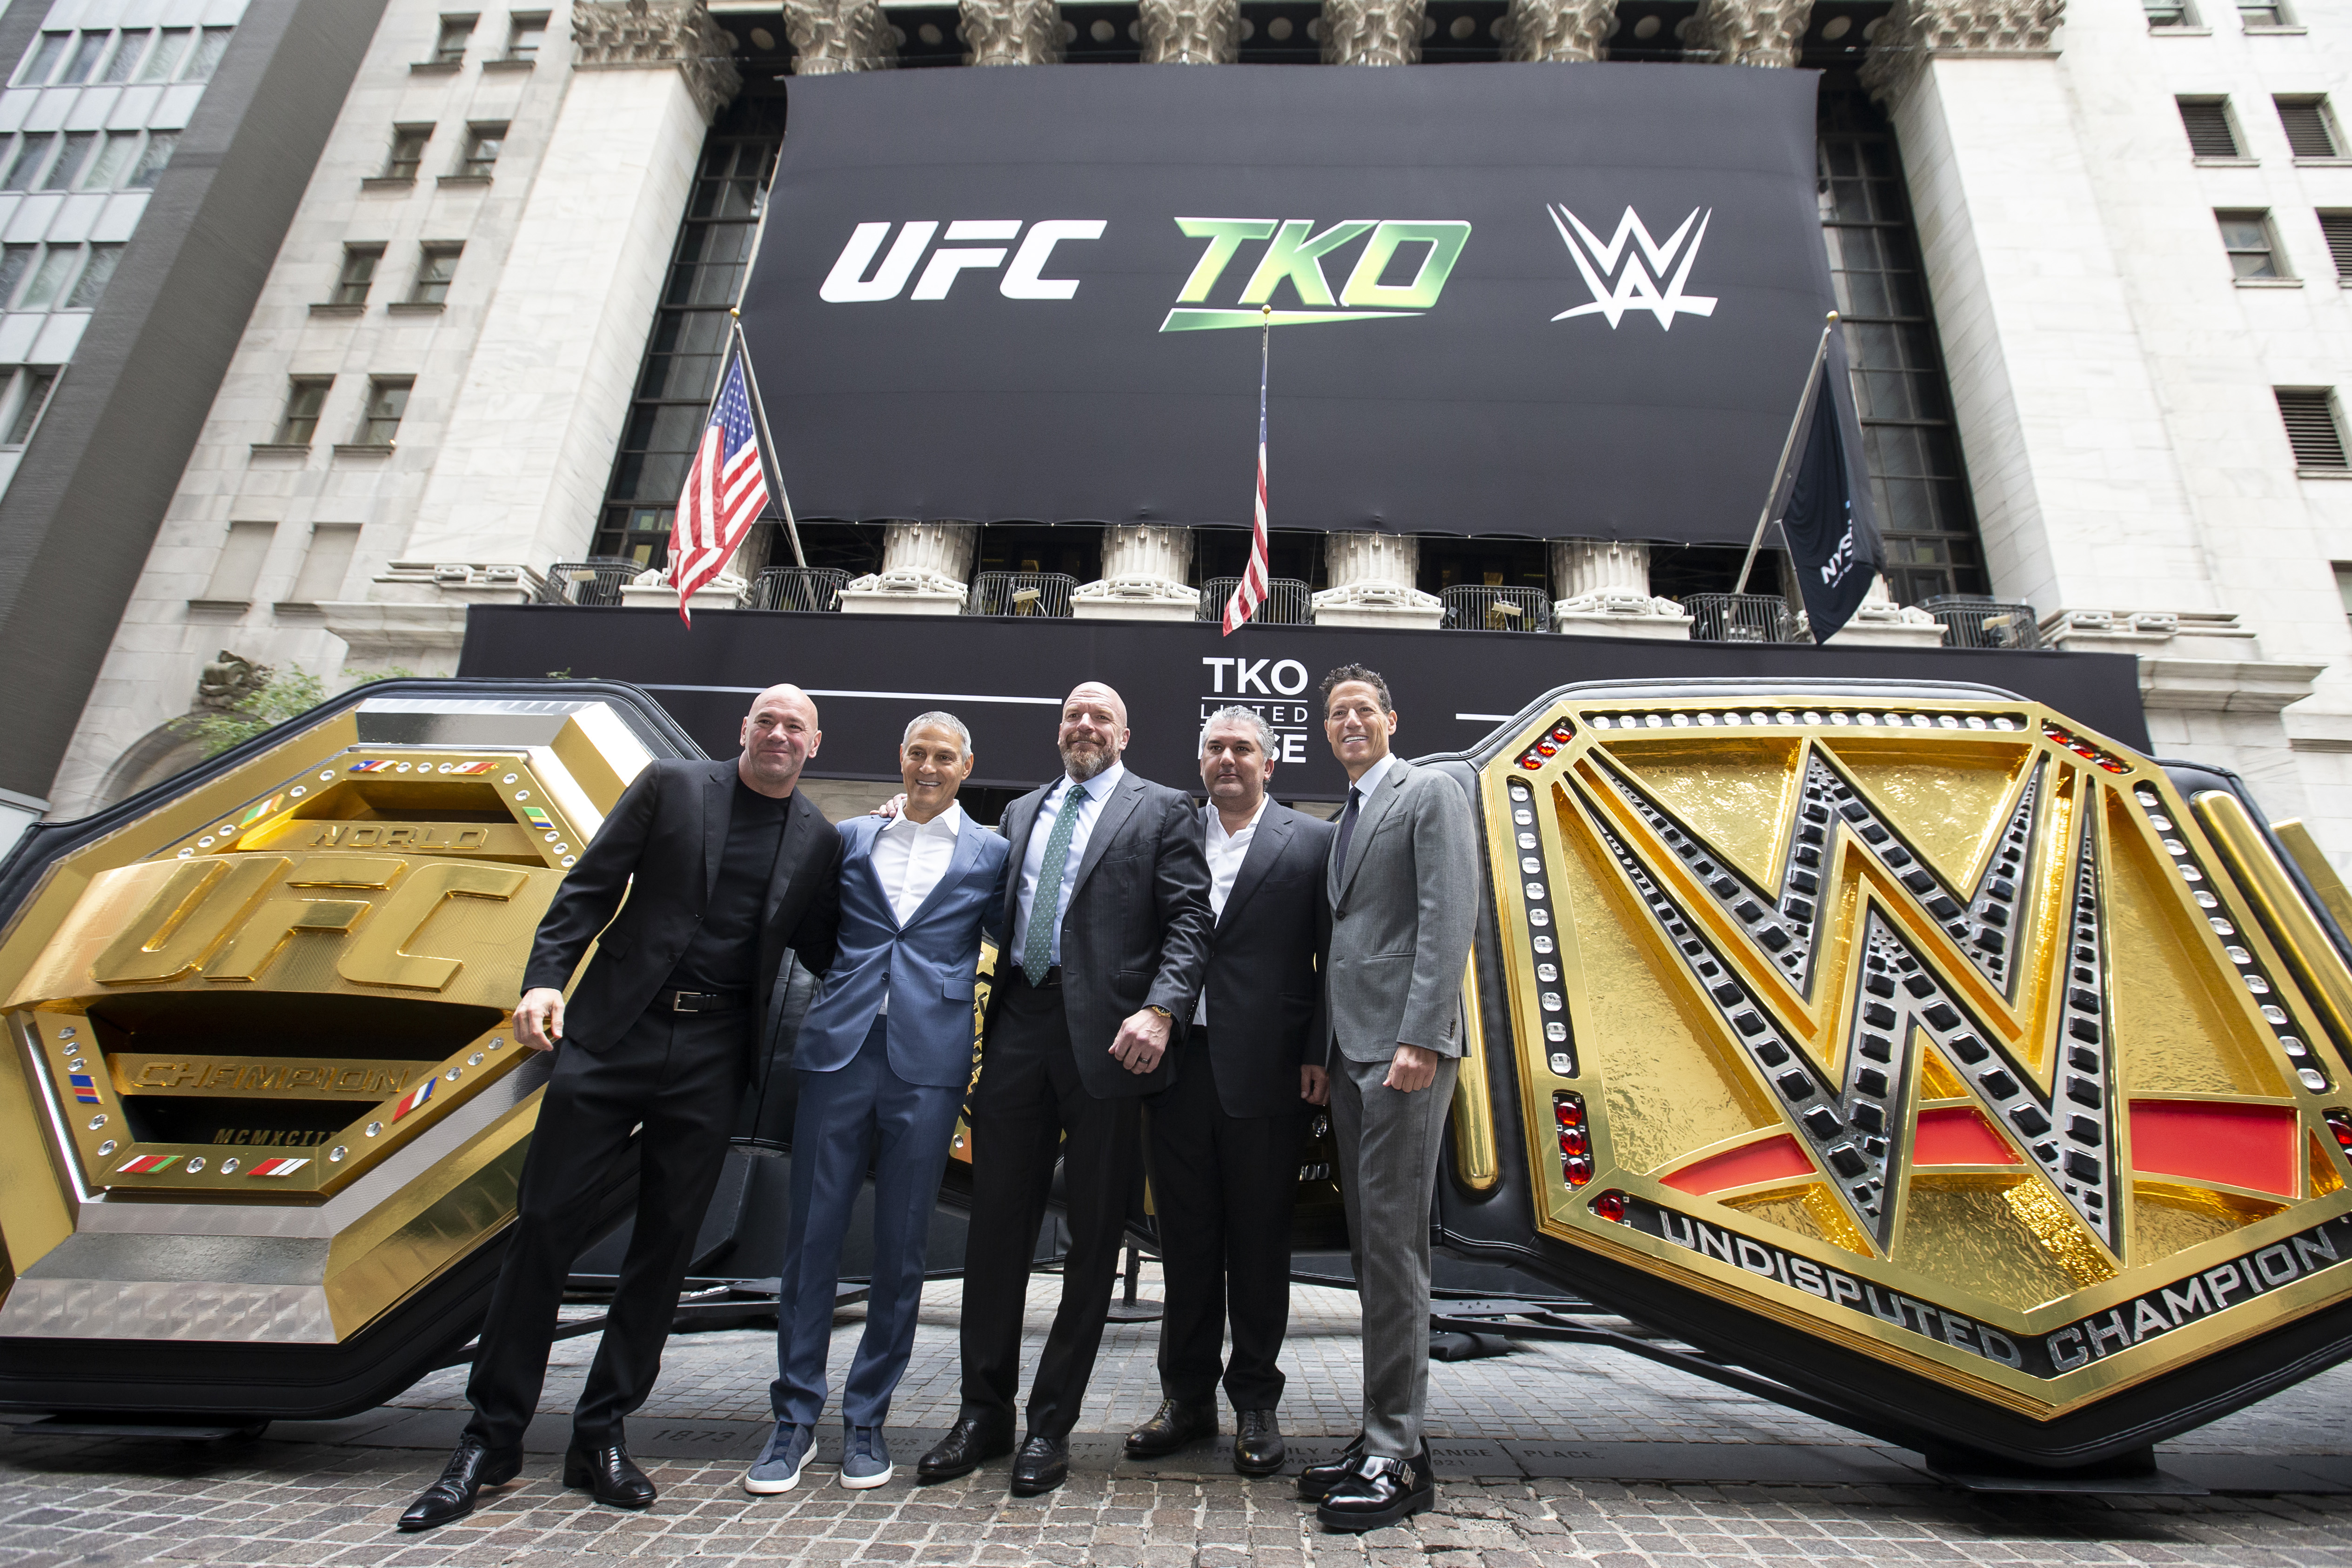 The move was announced as part of WWE and UFC's TKO partnership